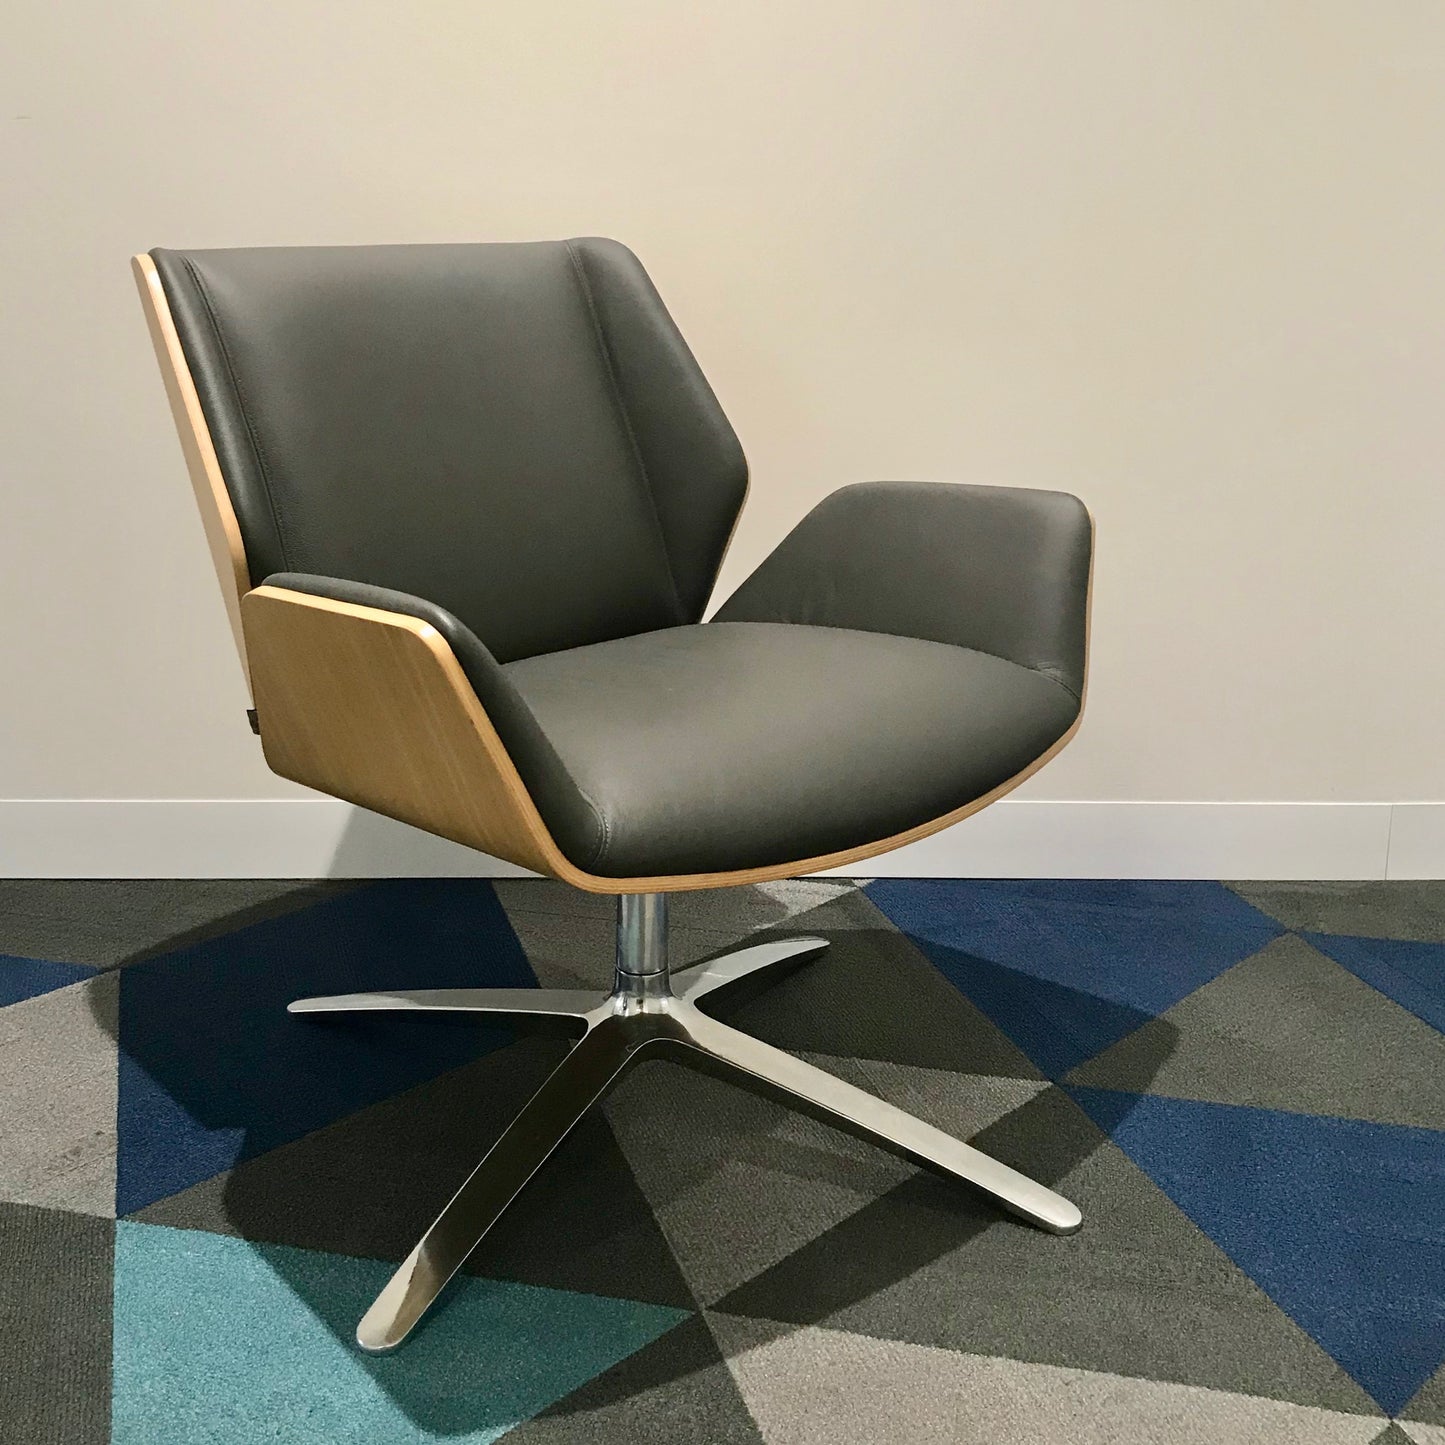 Kruze Lounge Chair by David Fox for Boss Design (2 available)